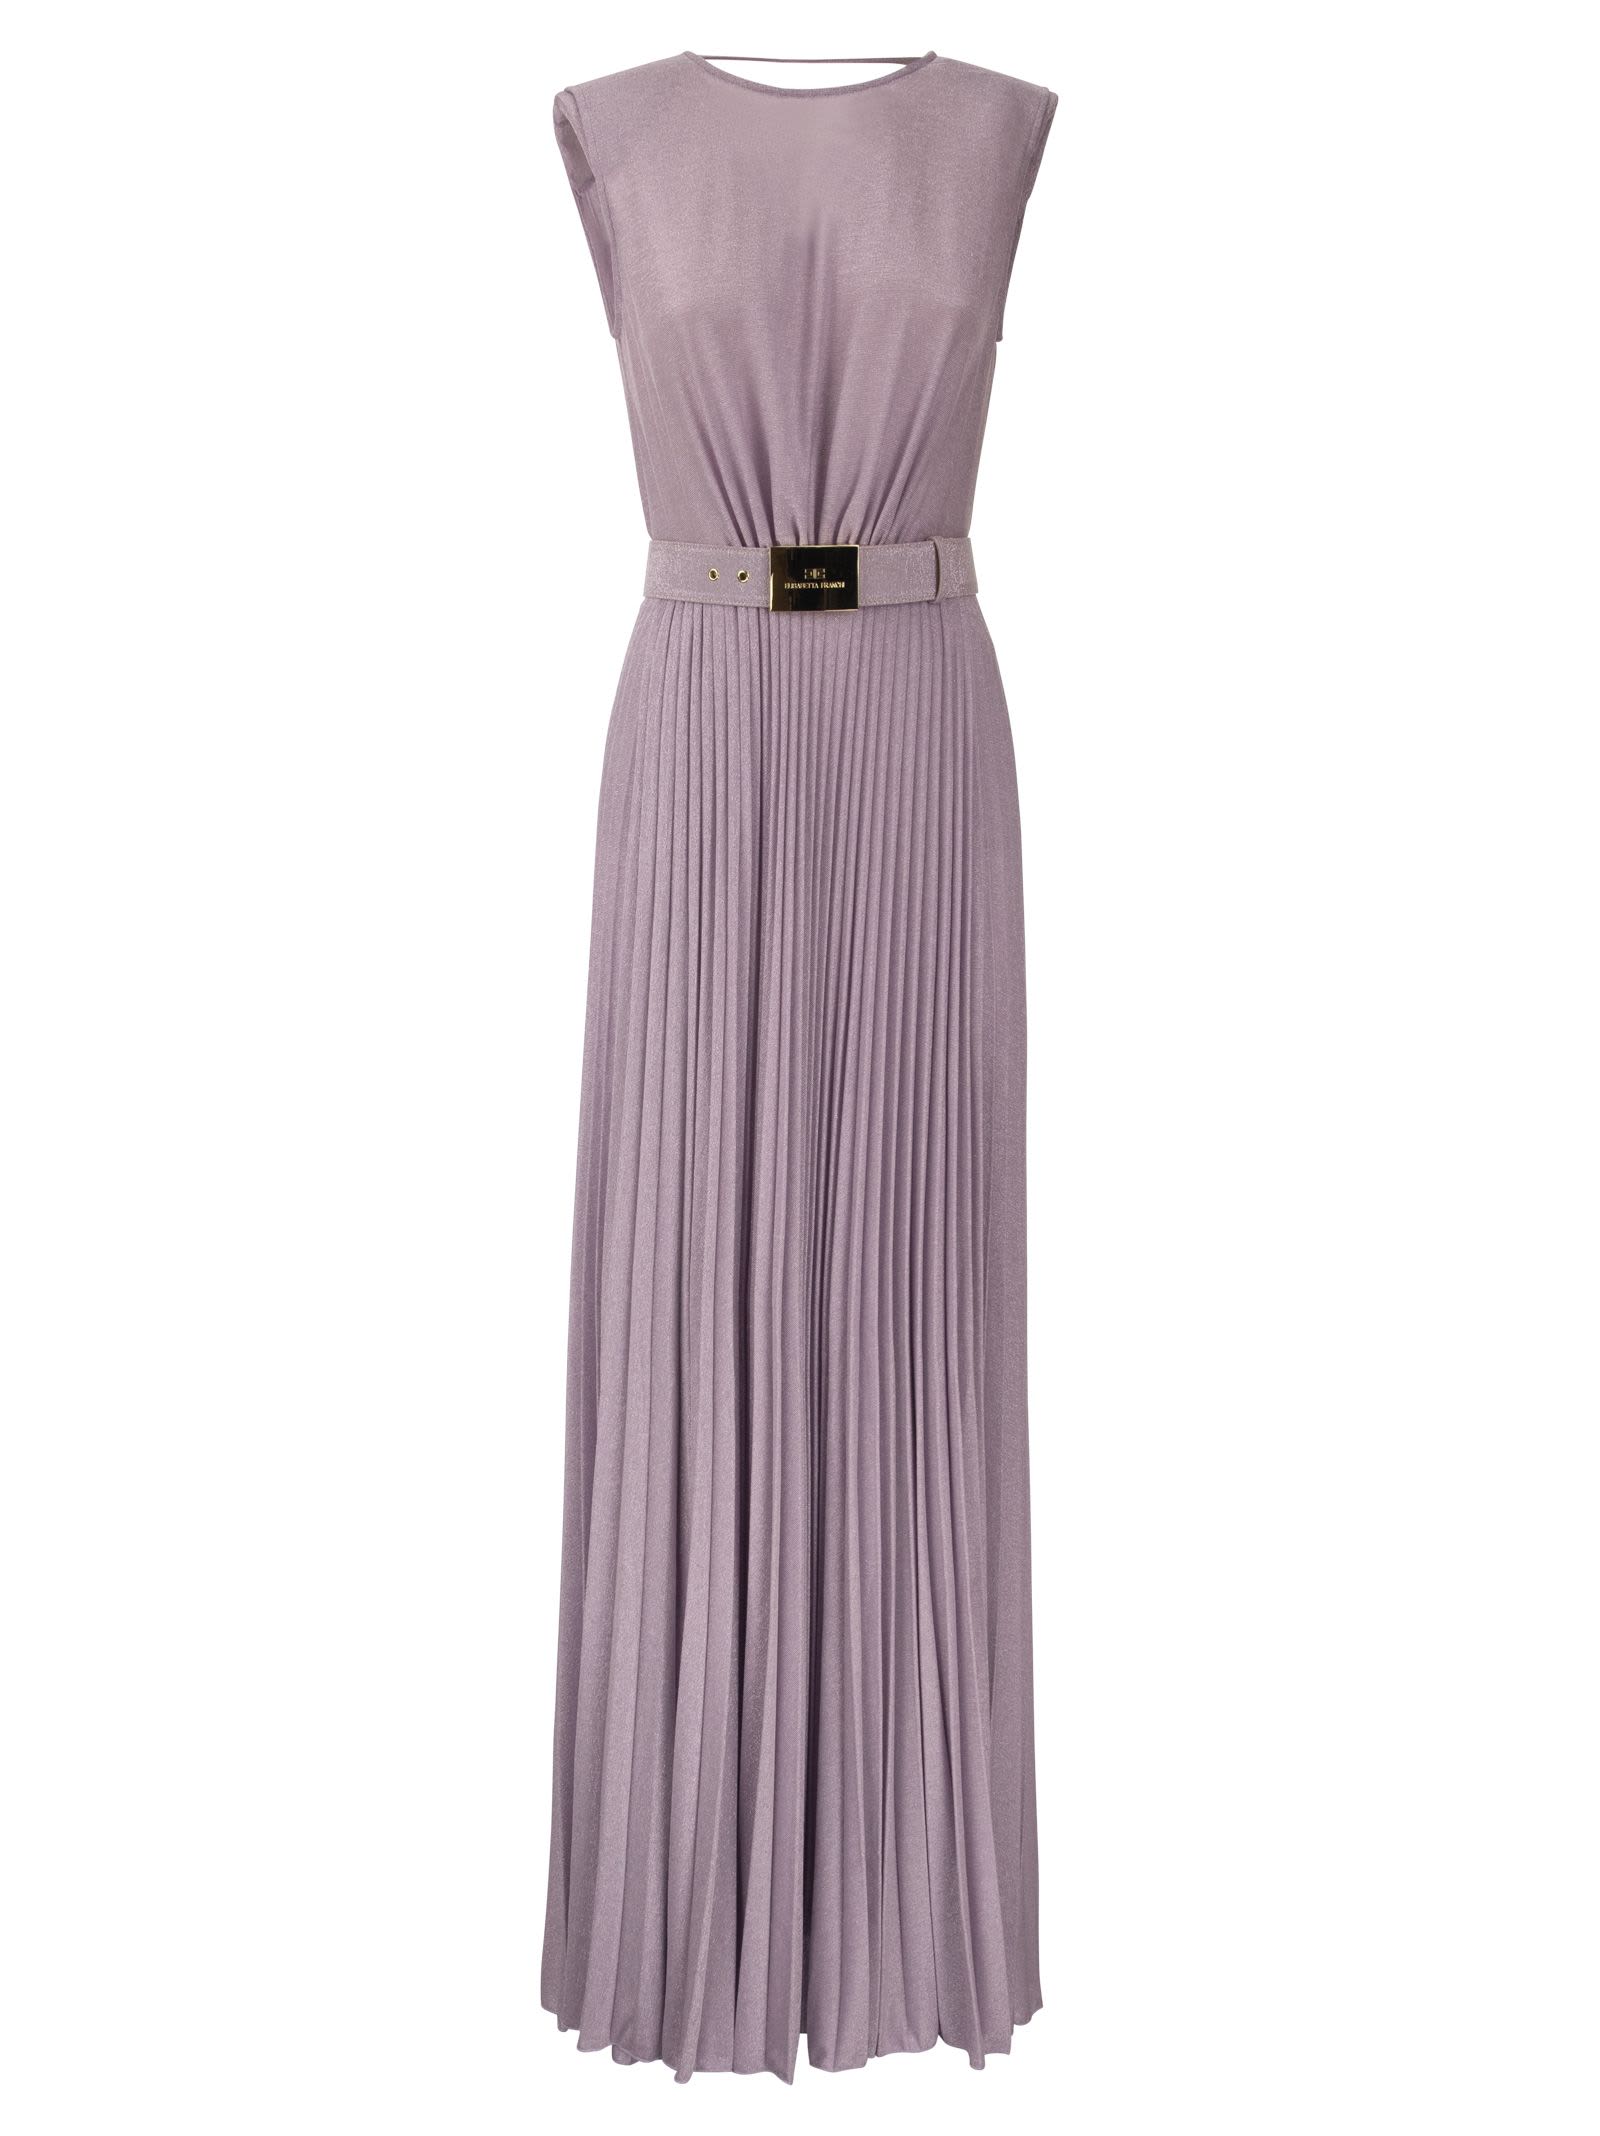 Elisabetta Franchi Red Carpet Dress With Pleated Skirt